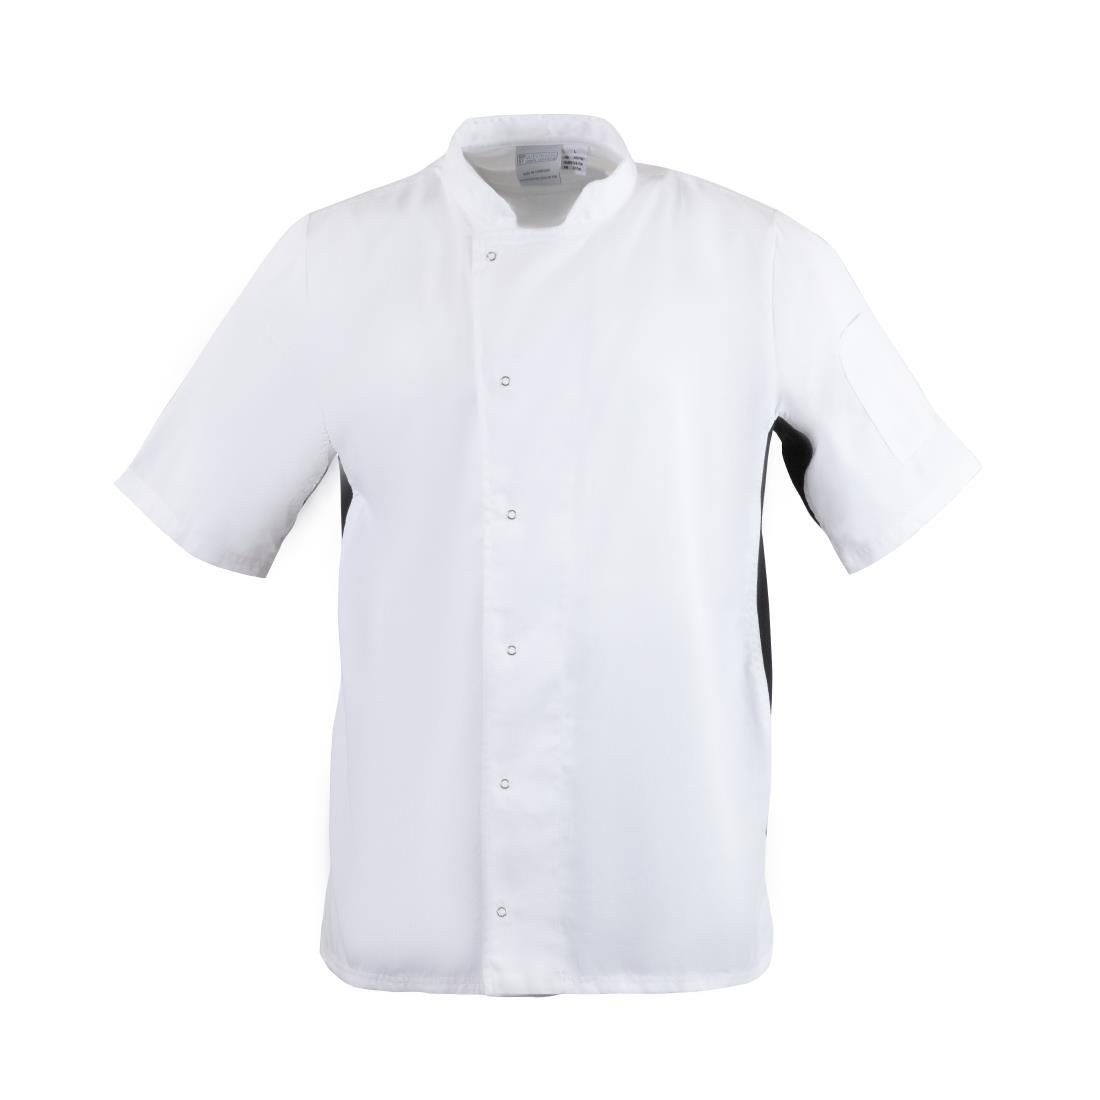 A928-S Whites Nevada Unisex Chefs Jacket Short Sleeve Black and White S JD Catering Equipment Solutions Ltd